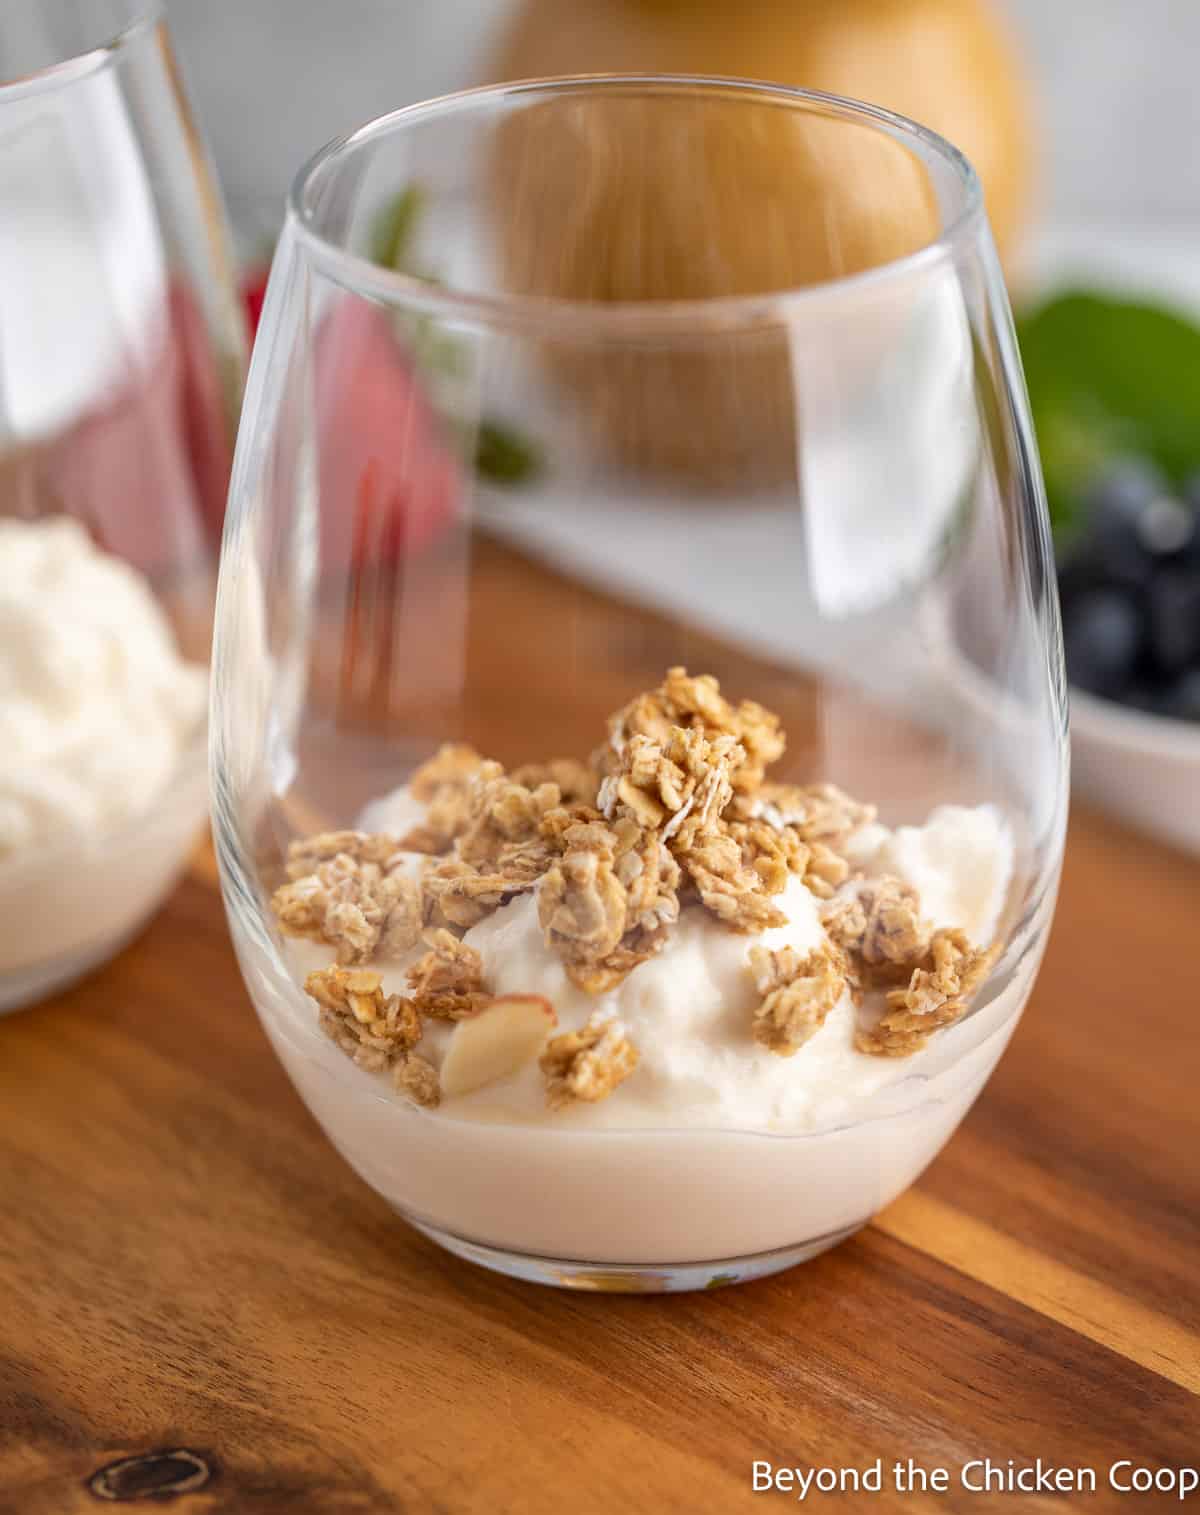 A layer of yogurt topped with granola in a glass.